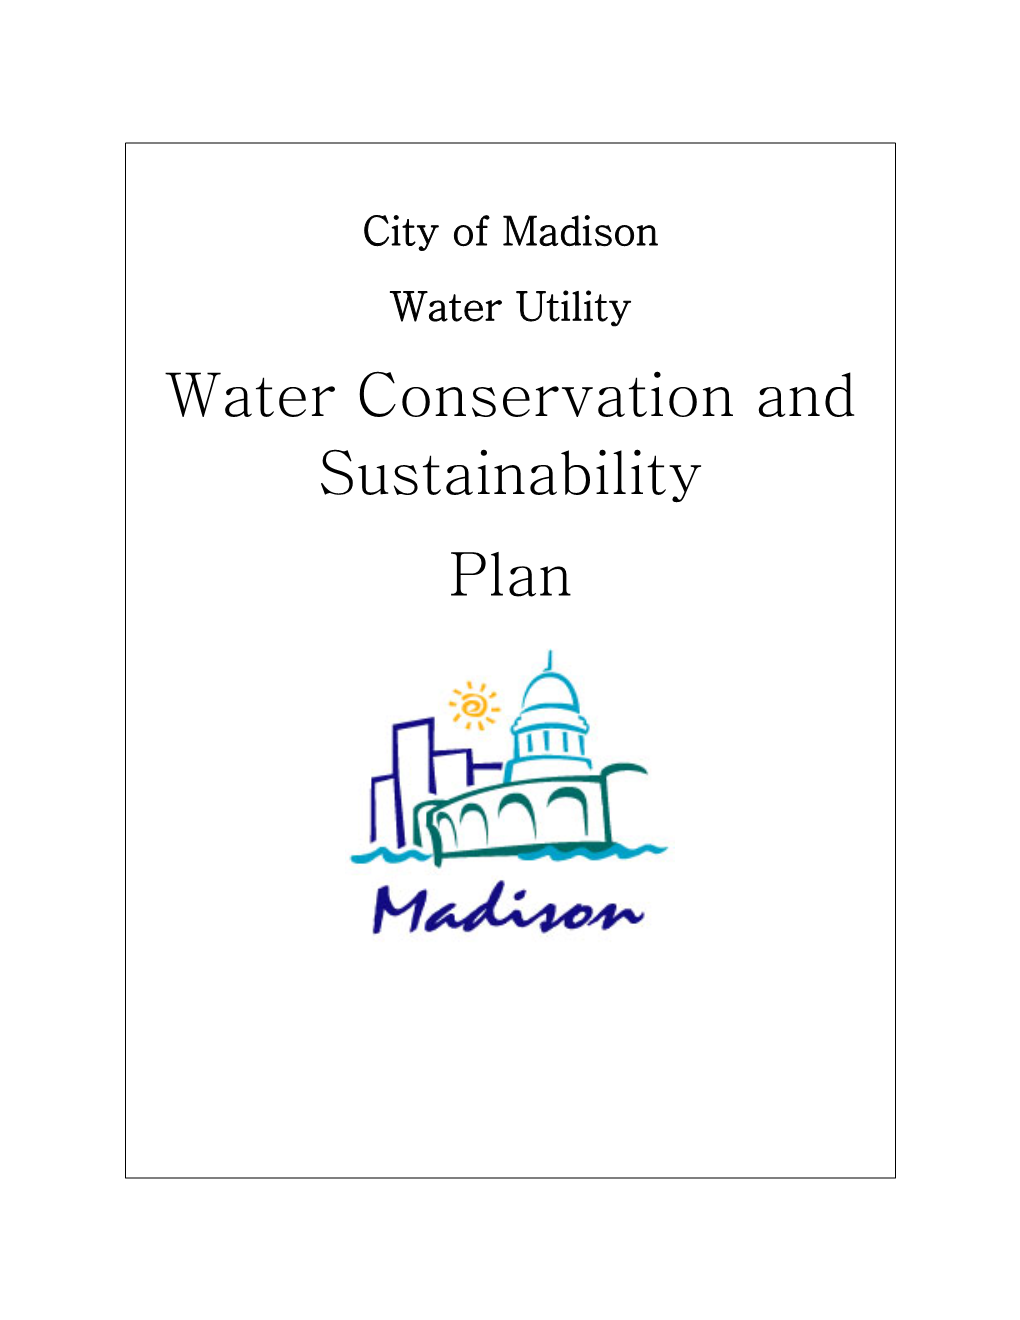 Water Conservation and Sustainability Plan